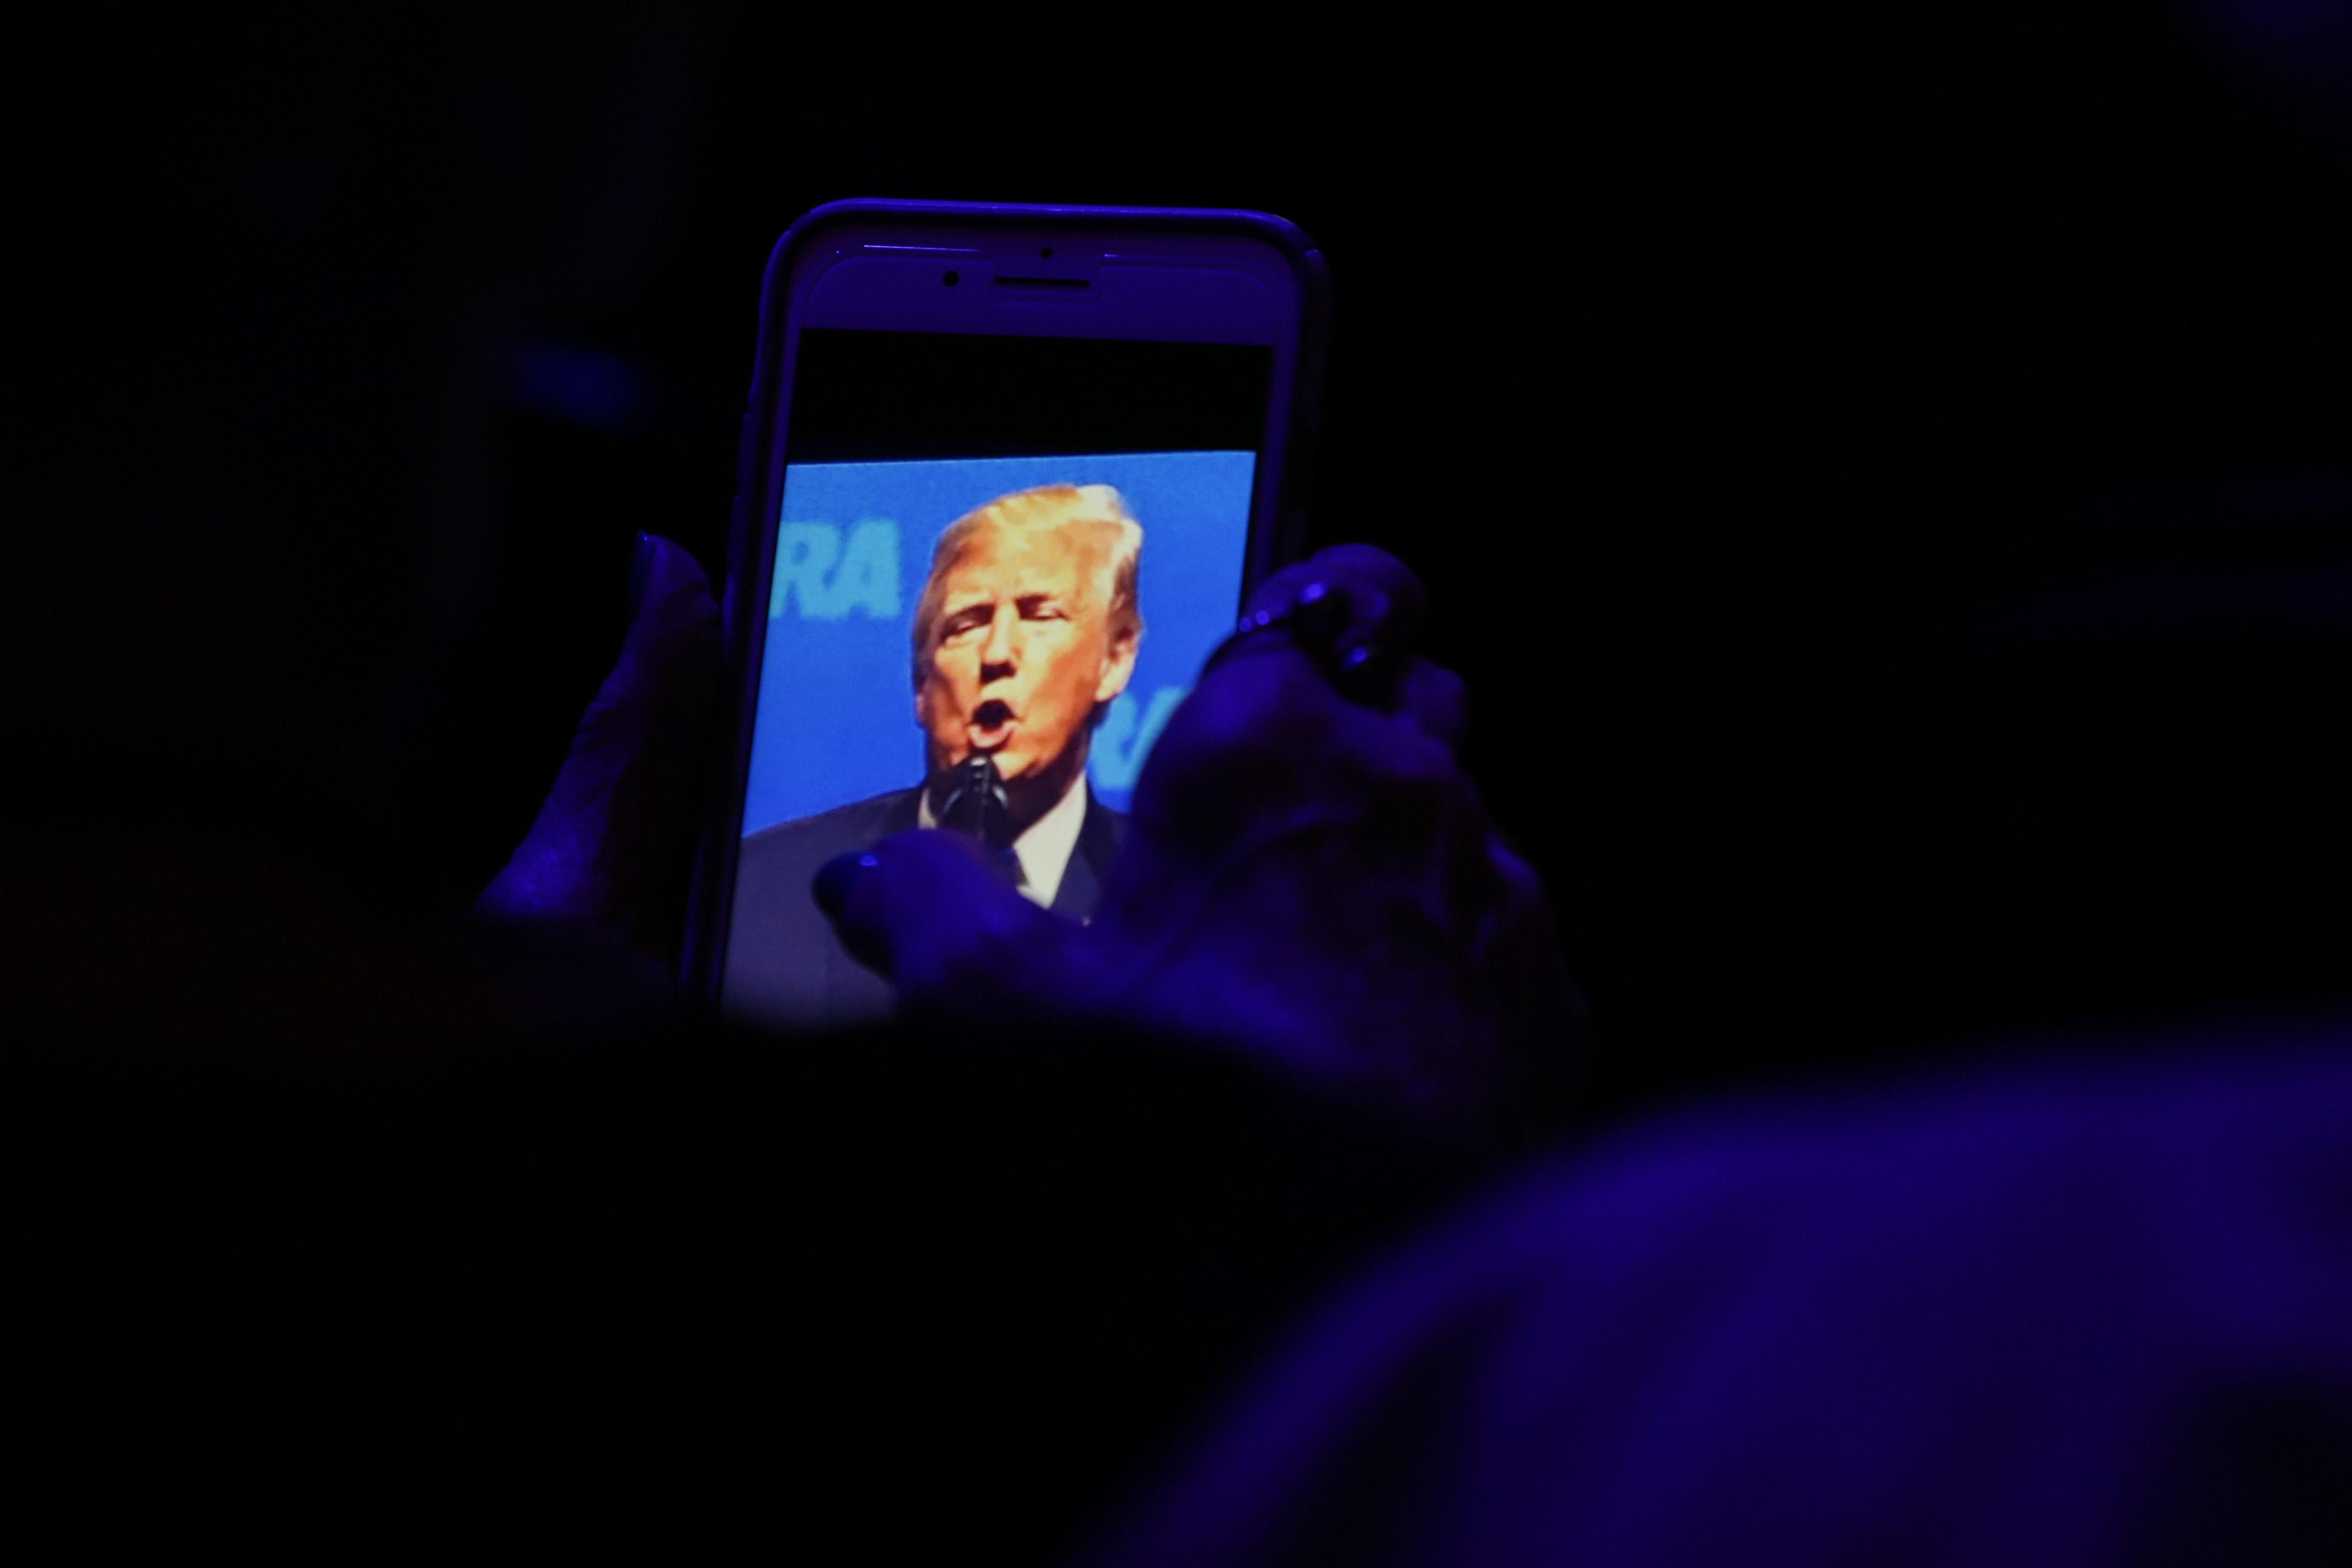 A woman snaps photos on her phone of US President Donald Trump as he speaks at the NRA-ILA Leadership Forum during the NRA Annual Meeting & Exhibits at the Kay Bailey Hutchison Convention Center on May 4, 2018 in Dallas, Texas. (Photo by Loren ELLIOTT / AFP)        (Photo credit should read LOREN ELLIOTT/AFP/Getty Images)